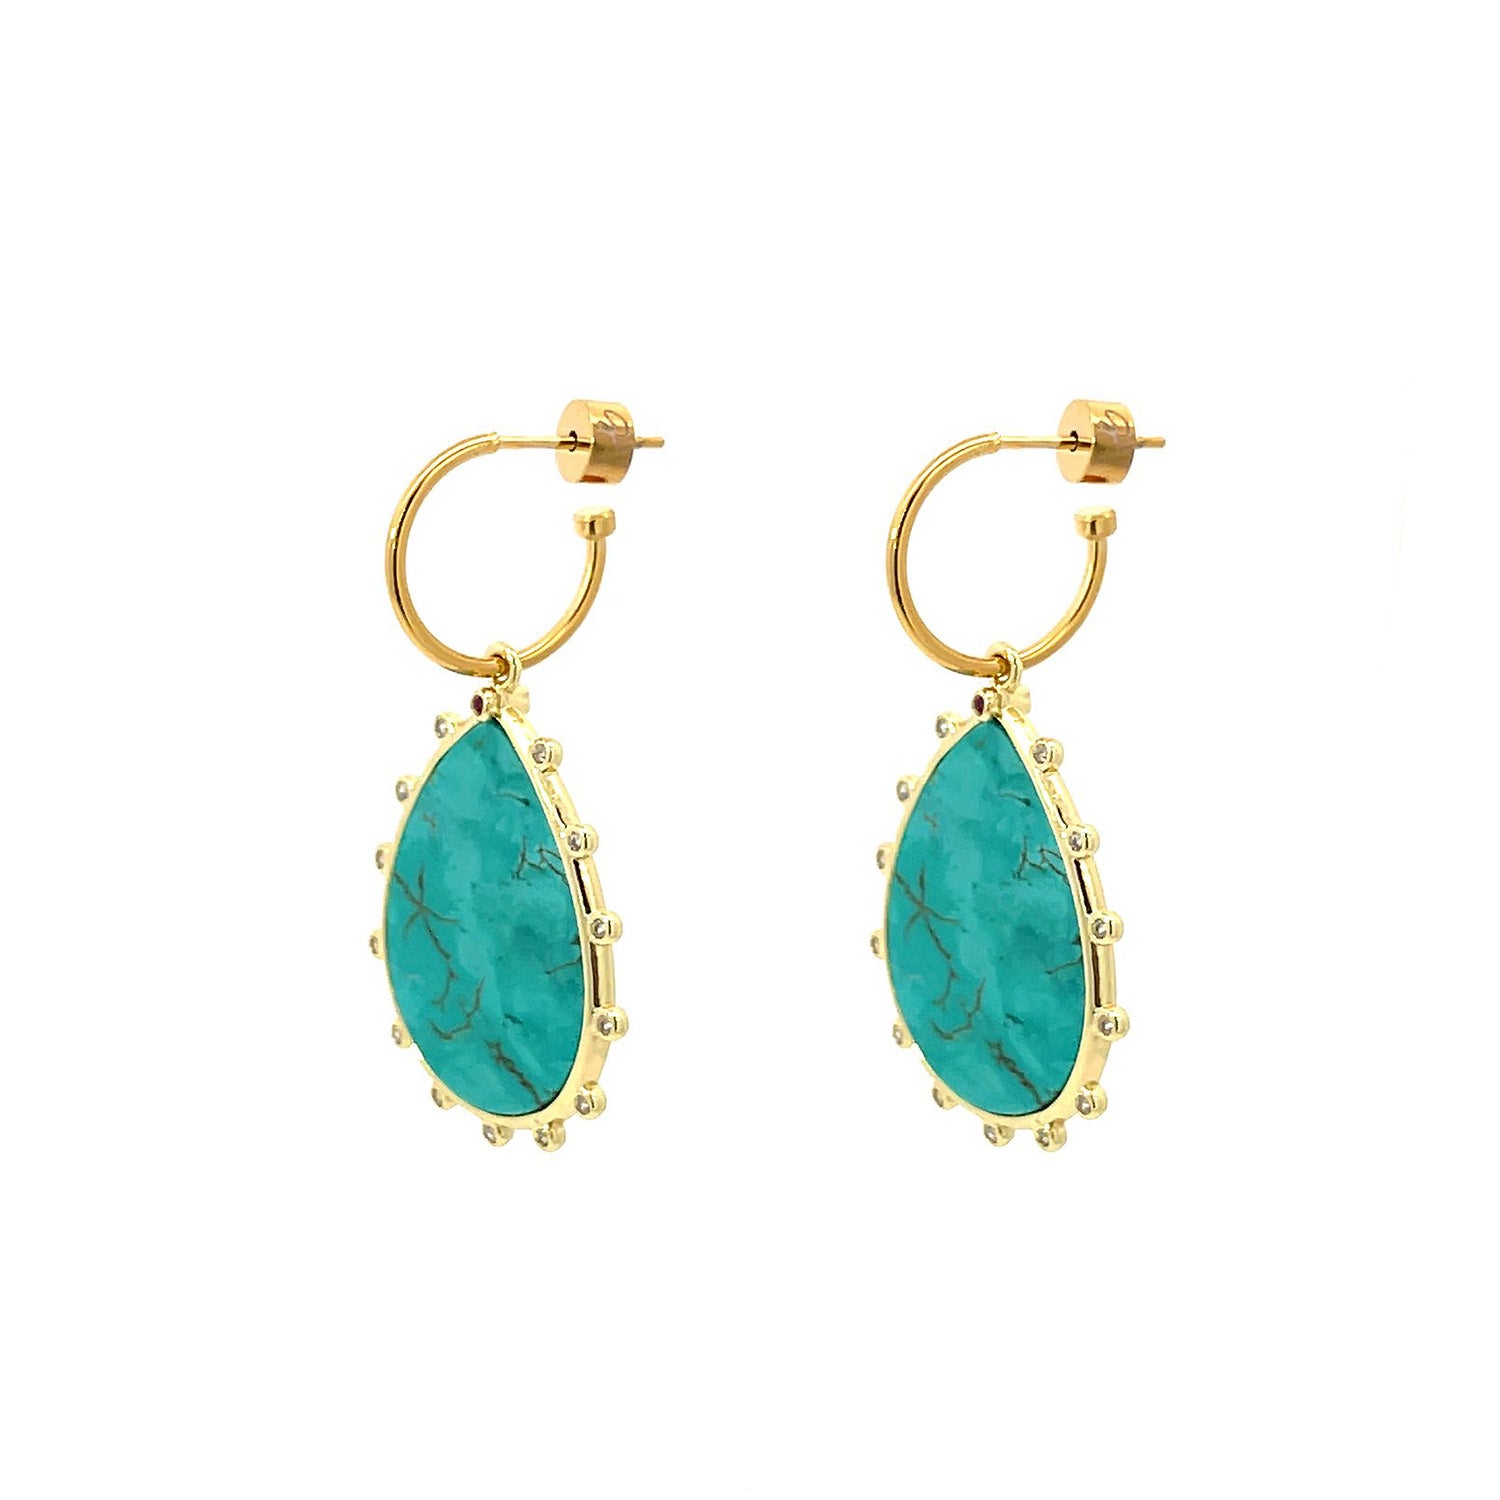 "SPIKED HEAVENLY BEAUTY" Turquoise Small Drop Earrings